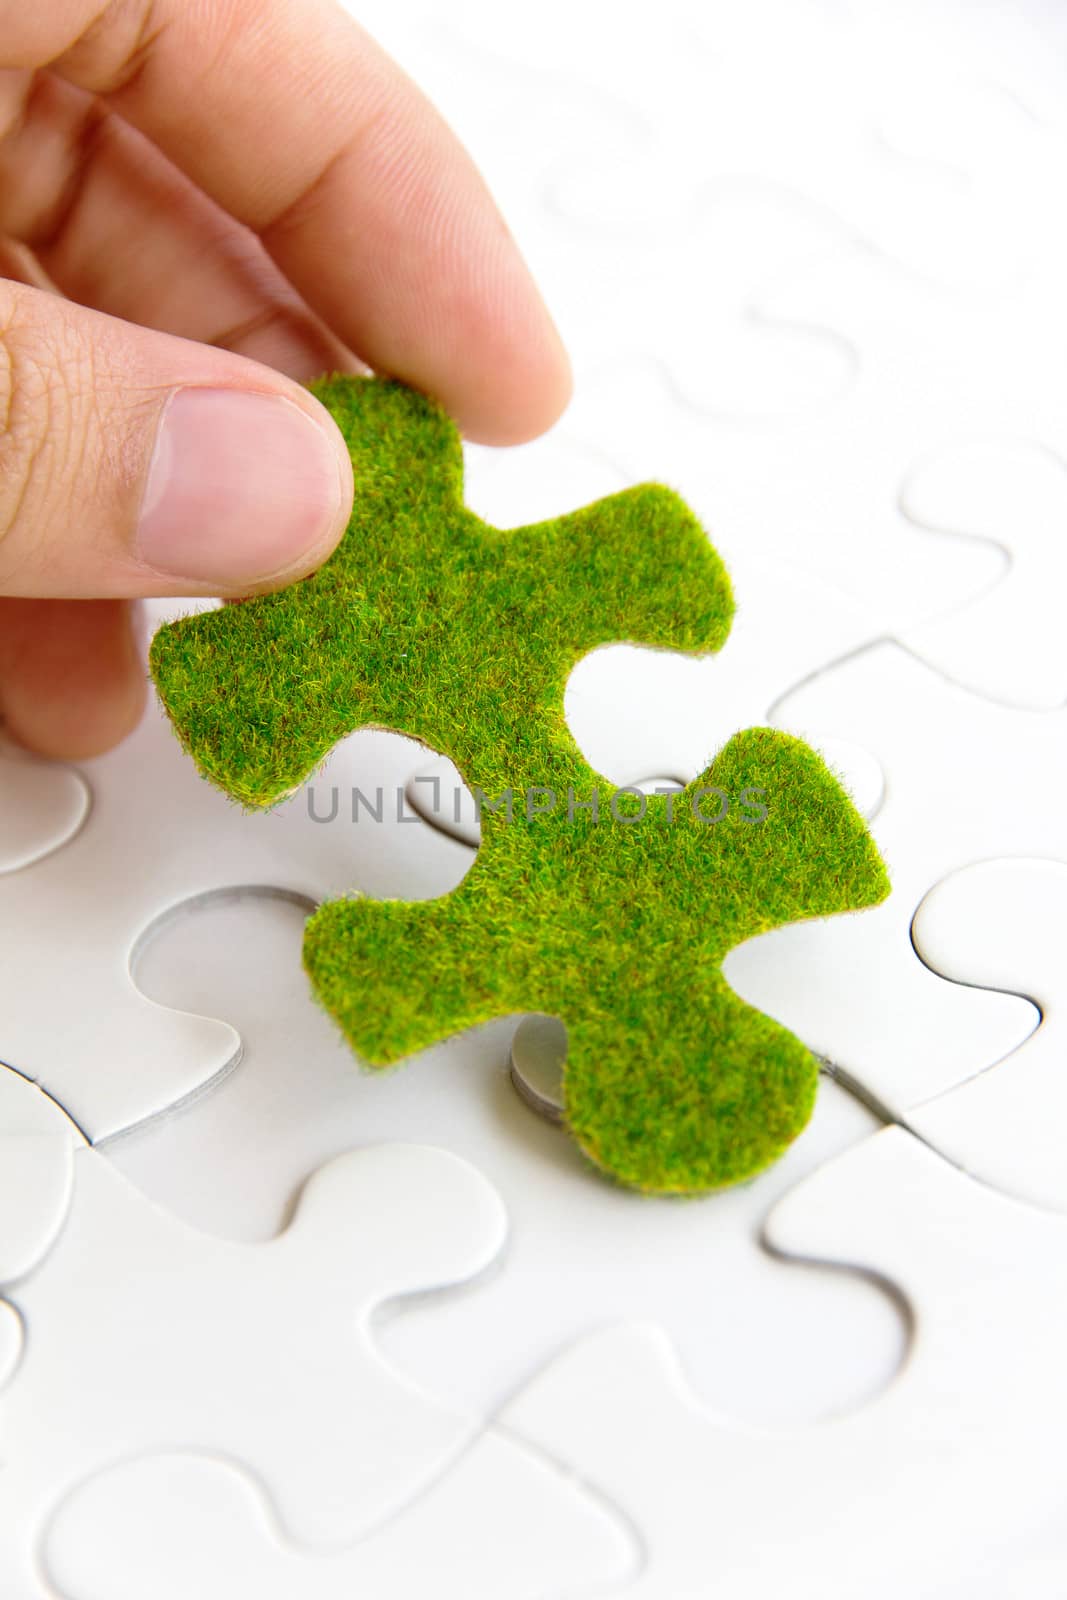 hand holding a green puzzle piece by ponsulak